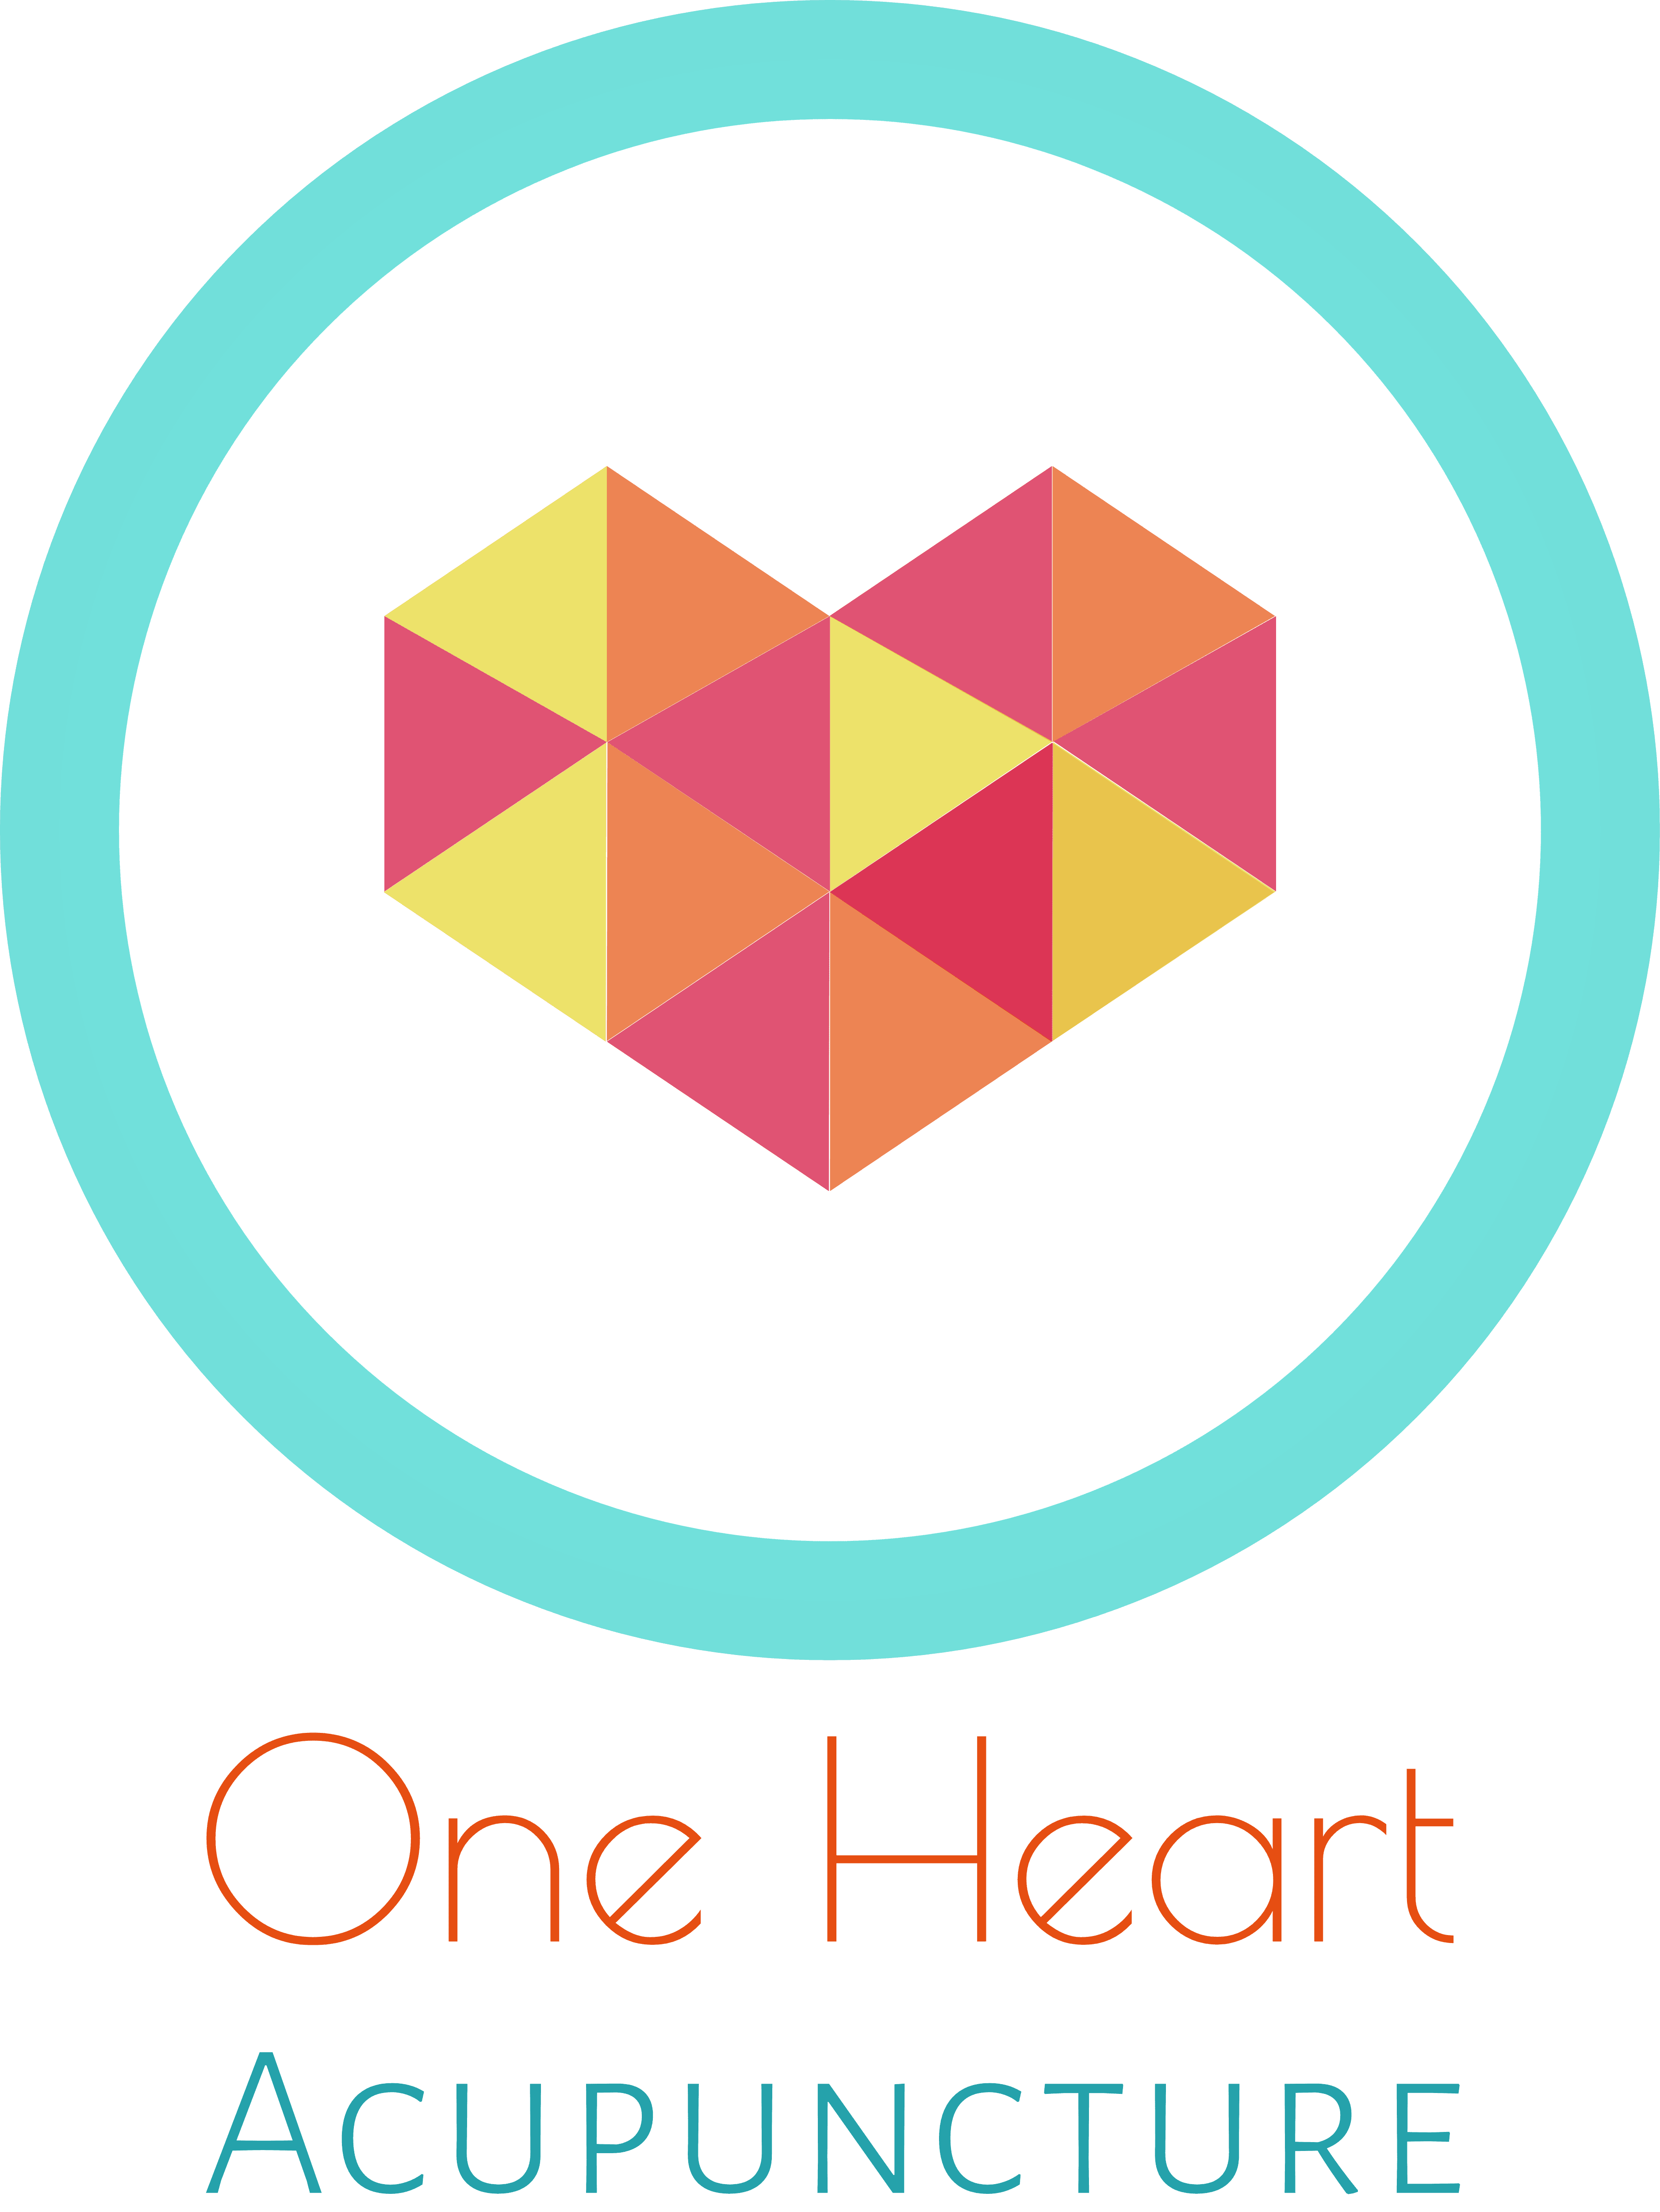 One Heart Acupuncture